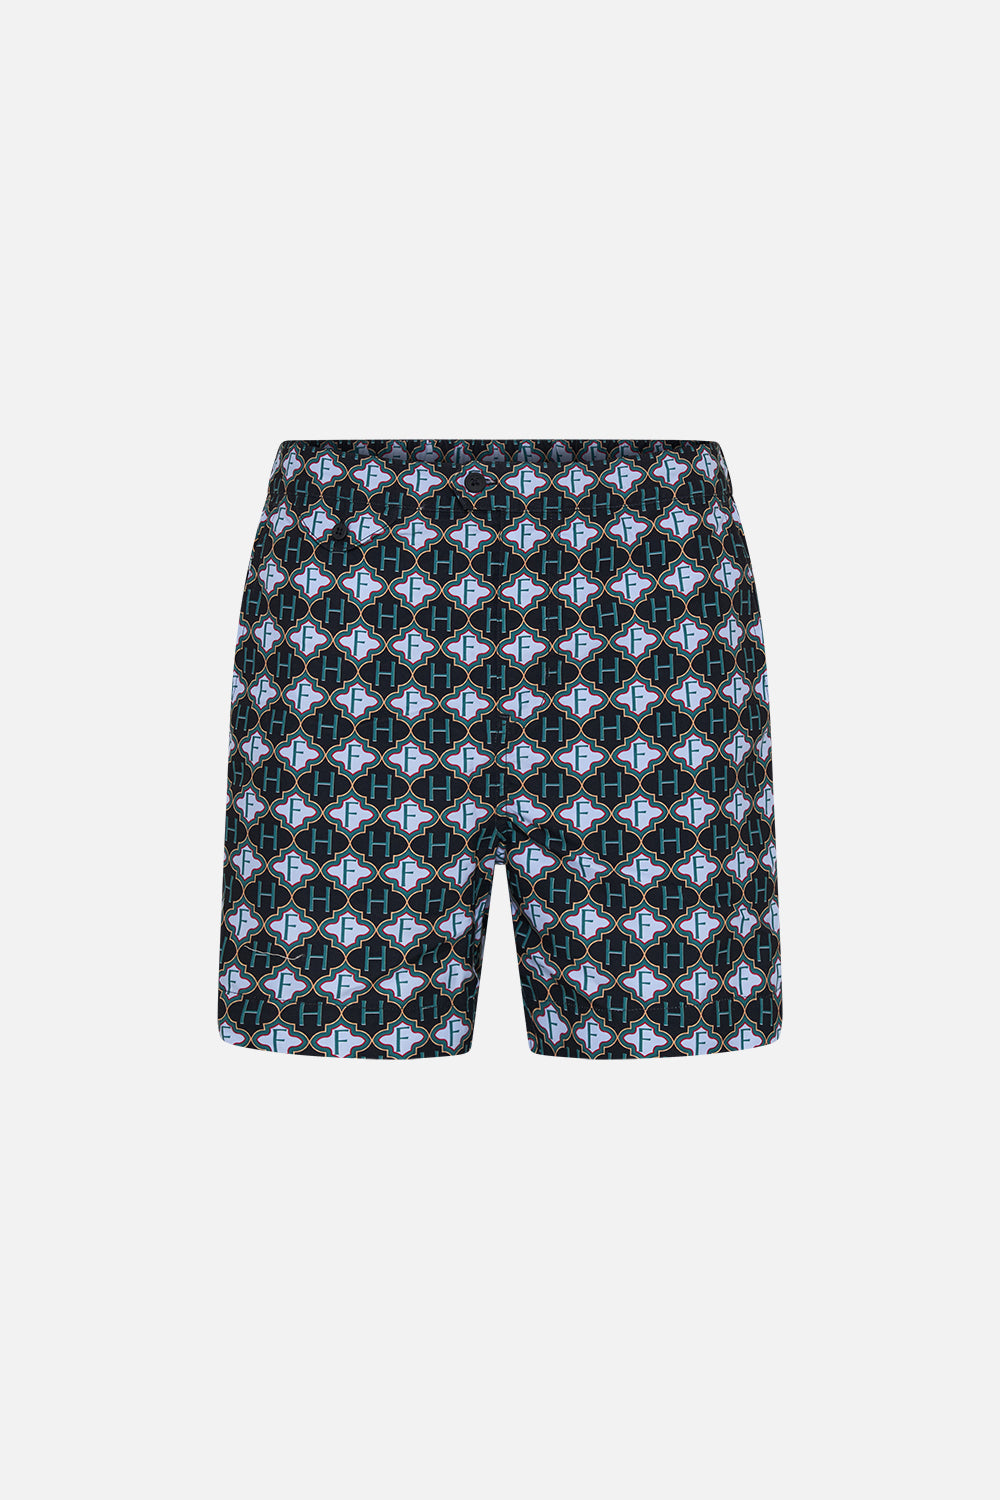 Product view of Hotel Franks by CAMILLA mens monogram print boardshorts in Jealousy And Jewels print